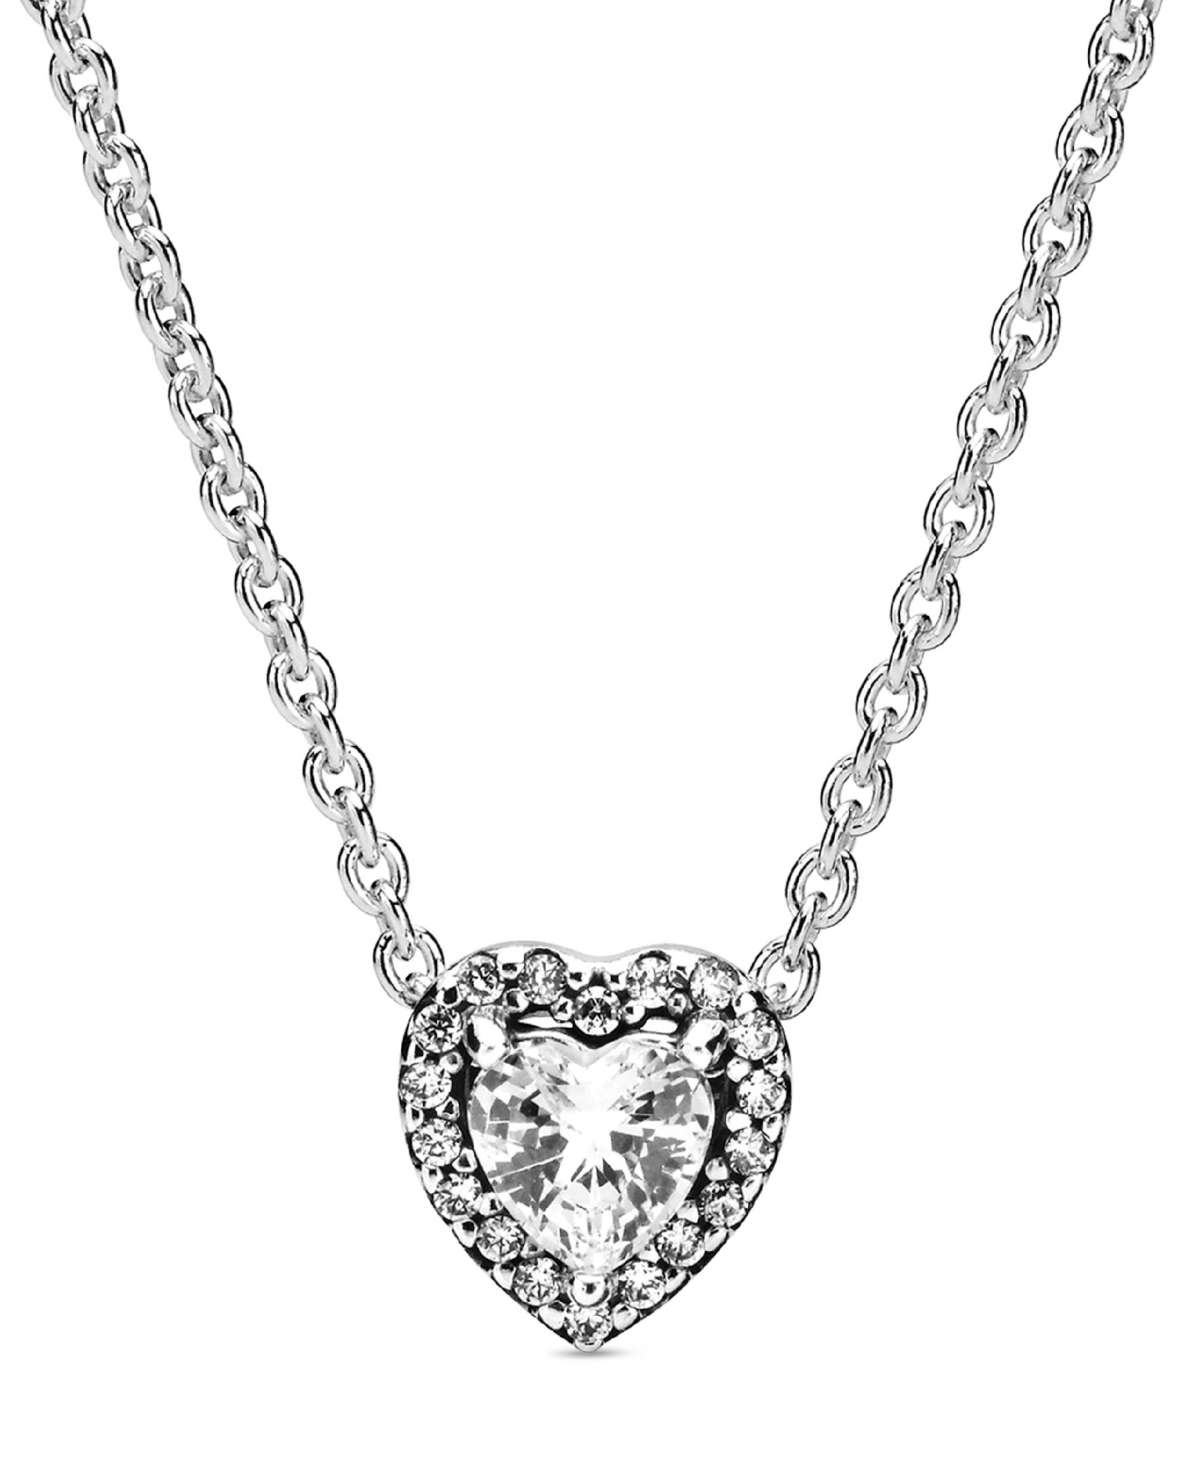 Pandora Timeless Sterling Silver Elevated Cubic Zirconia Heart Necklace